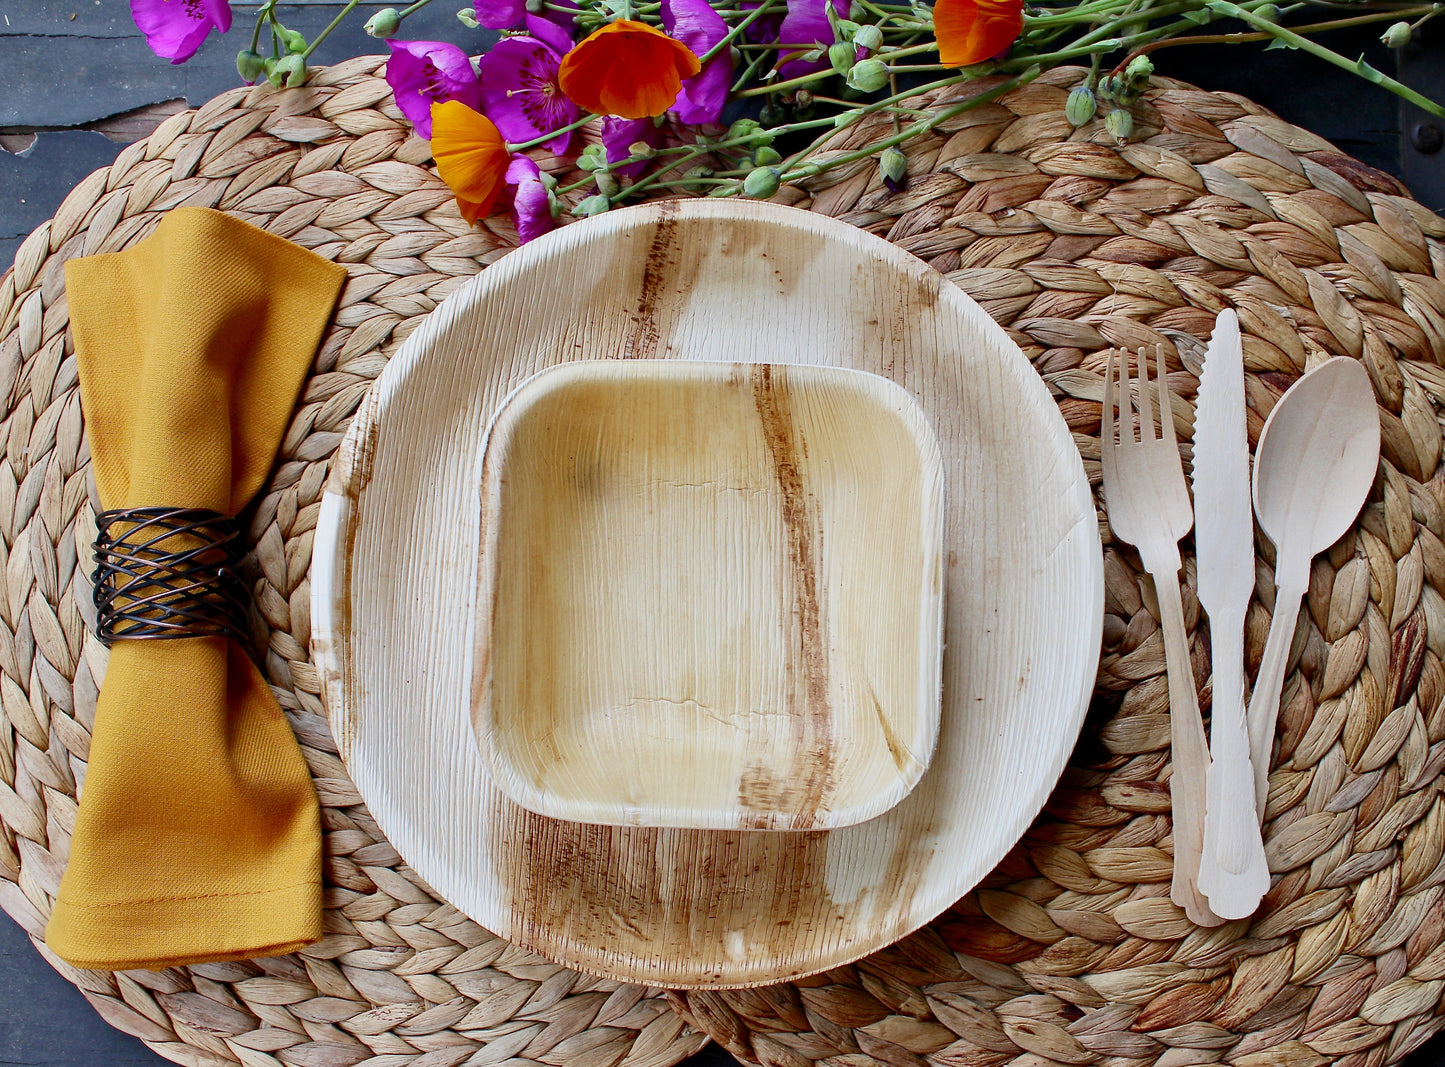 Copy of Copy of Bamboo Type Palm Leaf 25 Pic 10" Round  - 25 pice  Square deep 6"- 25  pic  cup  - 75 pic Cutlery - 50 Pic Napkin